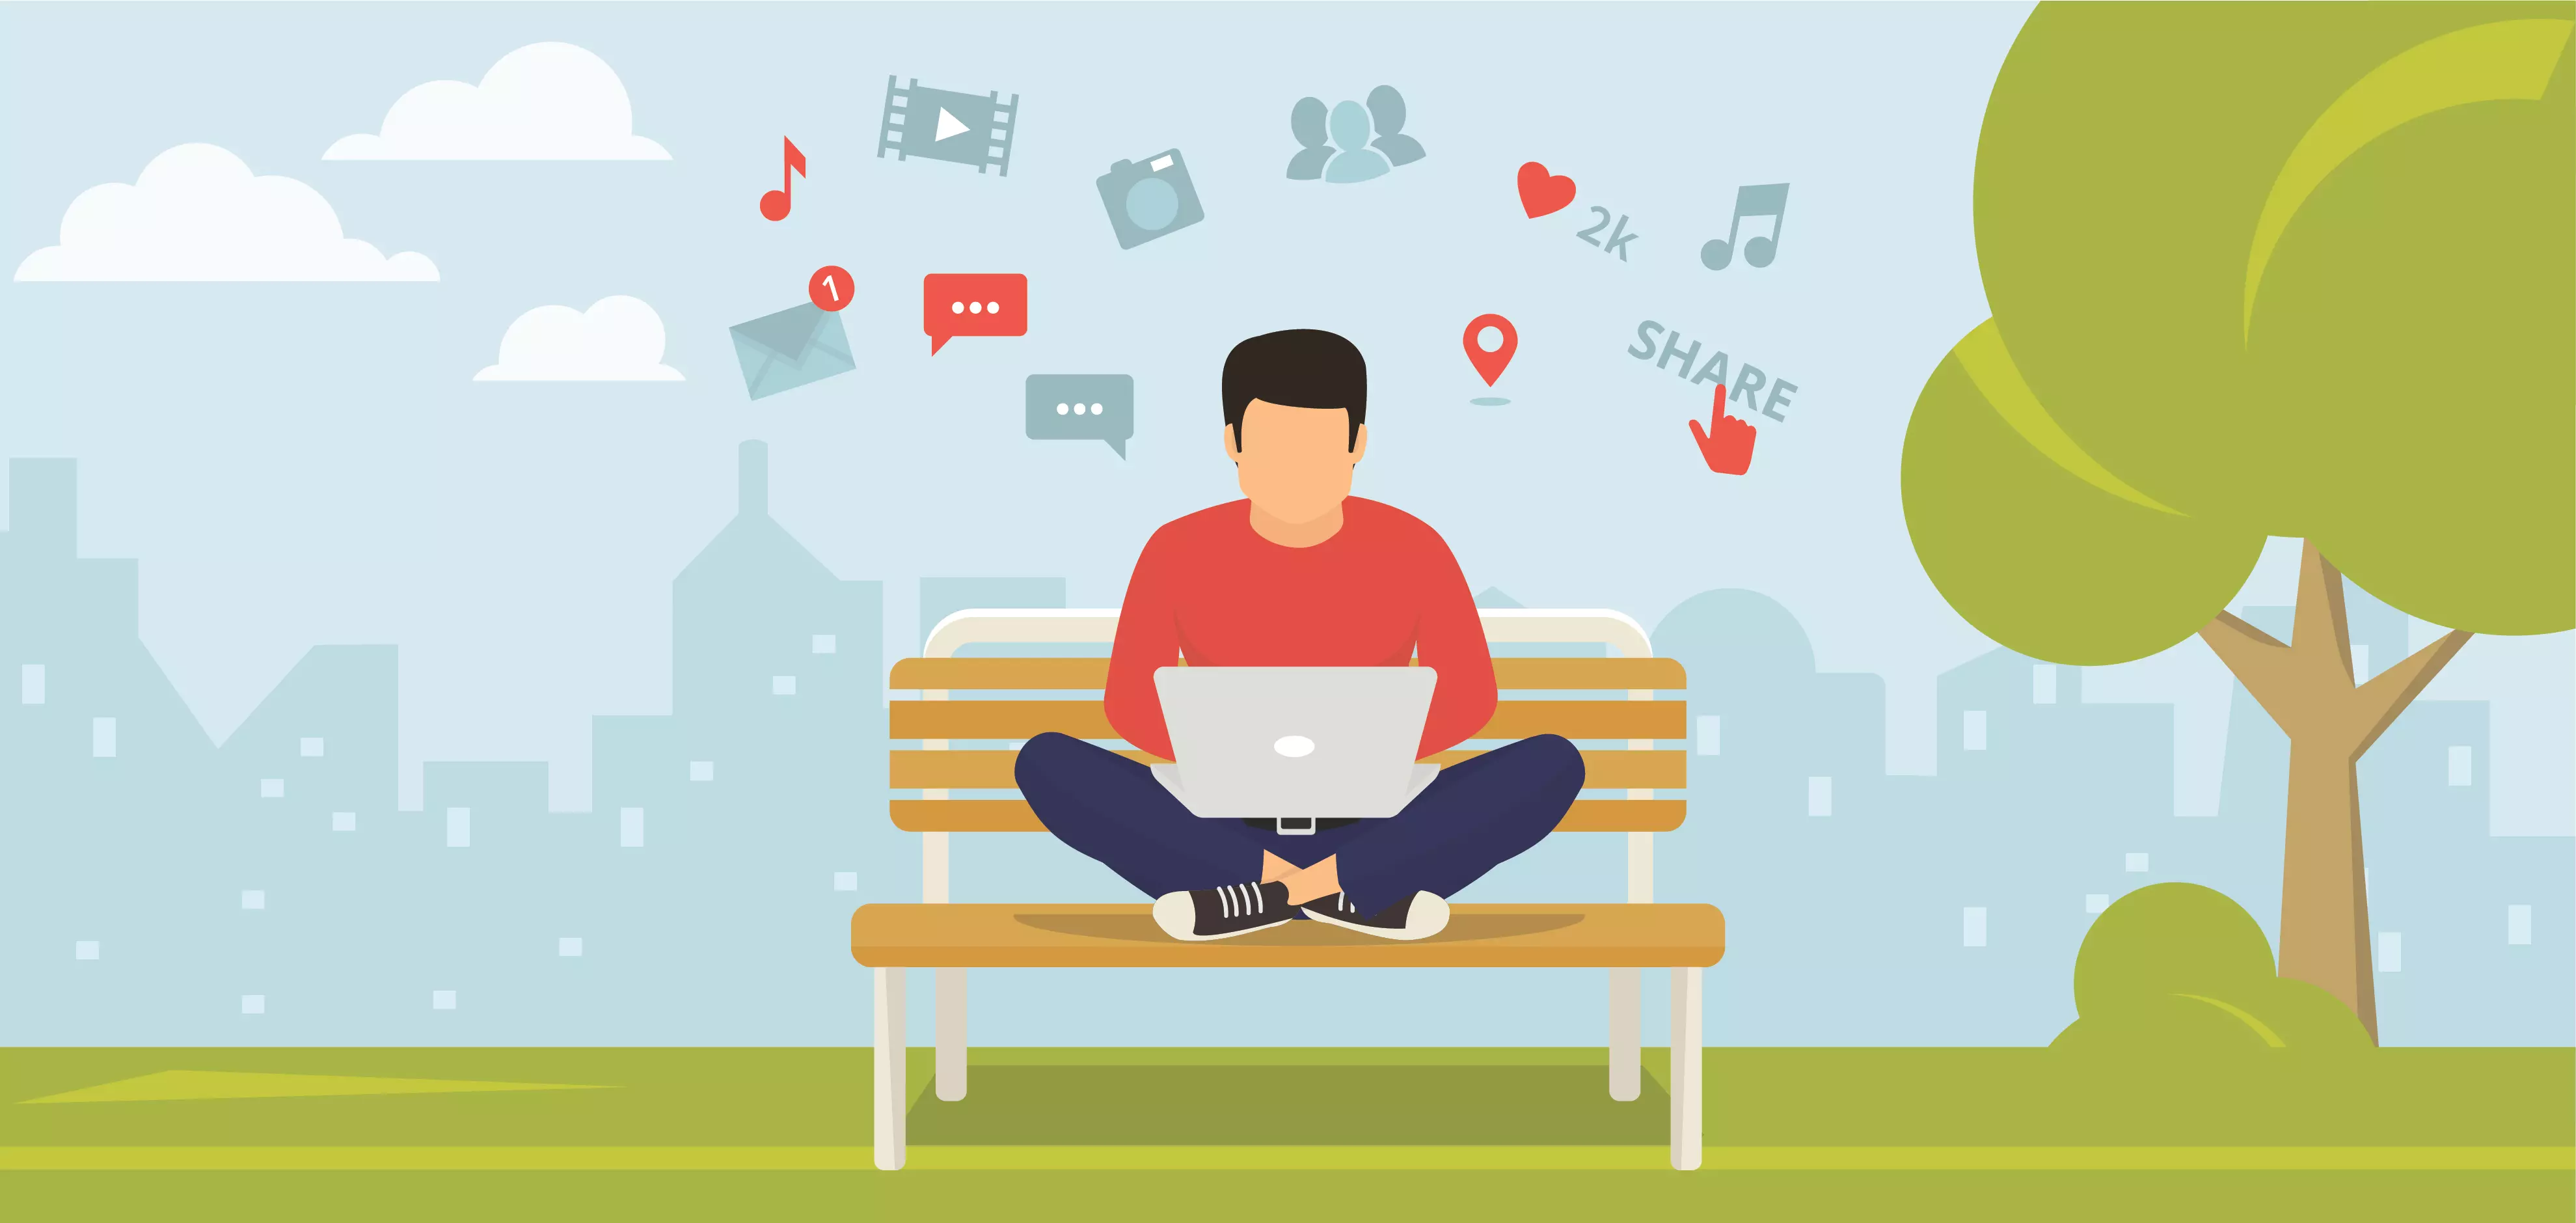 Illustration of student on a laptop with social media icons above.